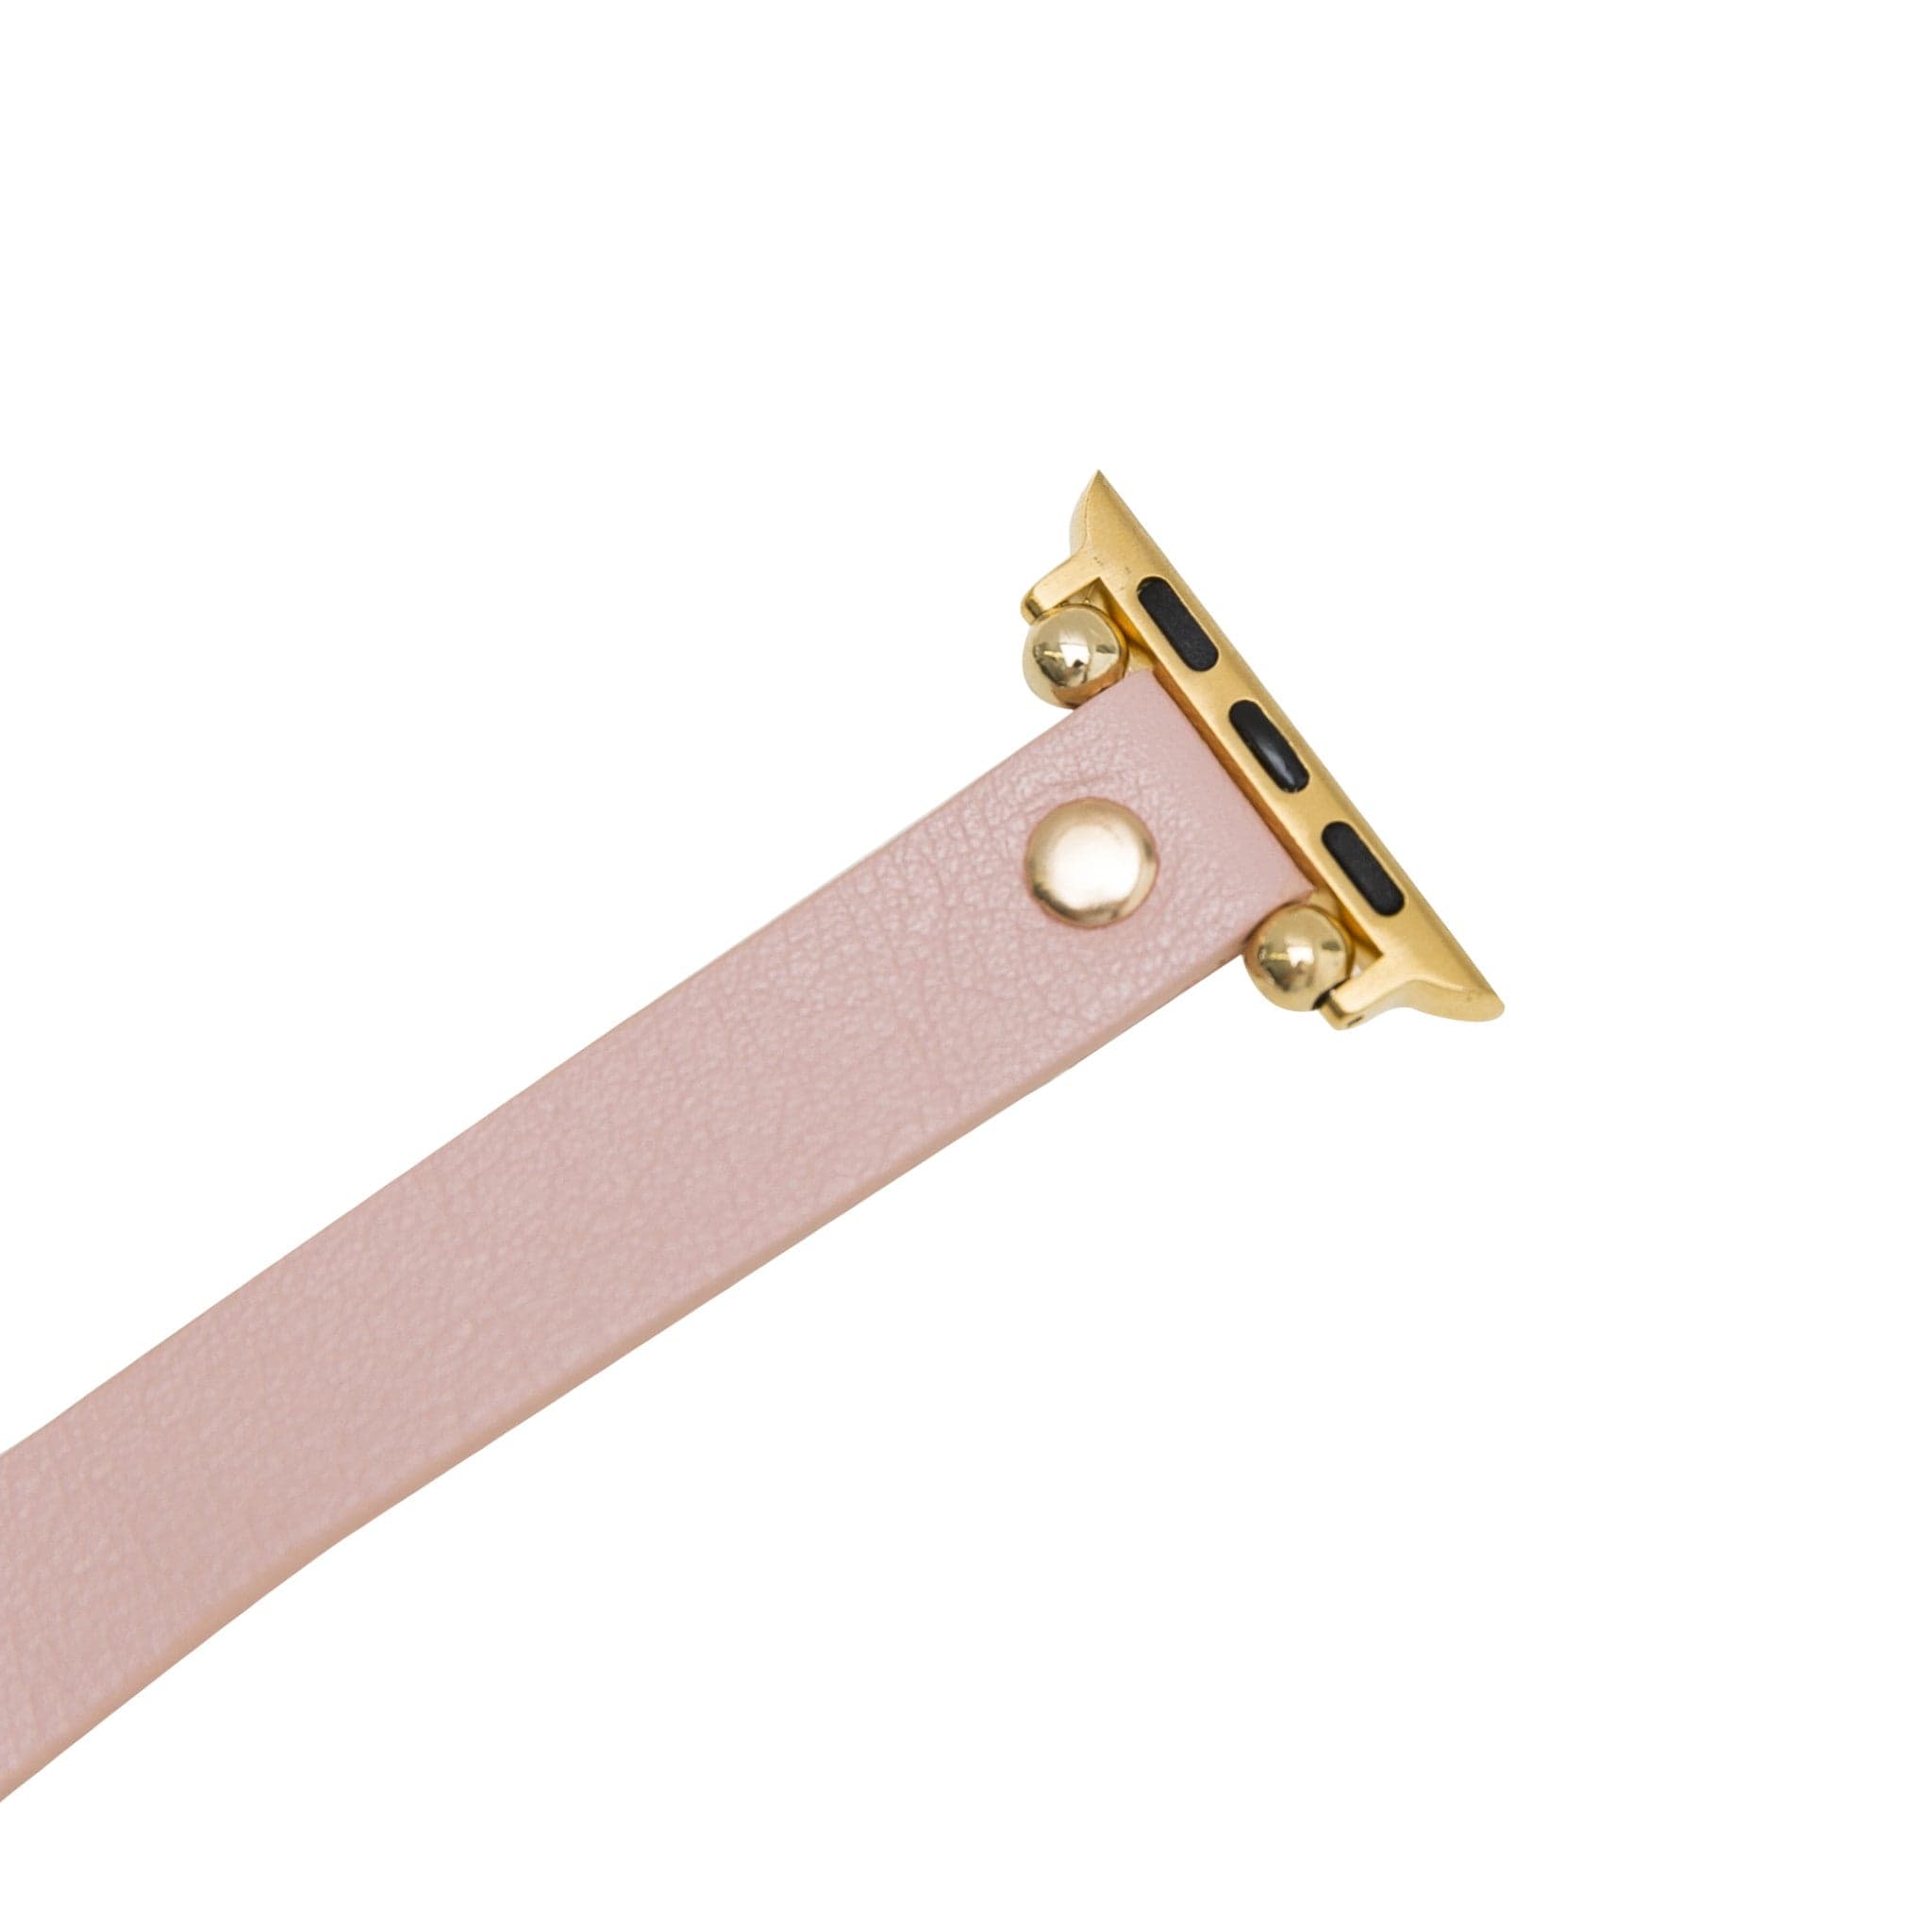 Leeds Double Tour Slim with Rose Gold Bead Apple Watch Leather Straps Bouletta LTD